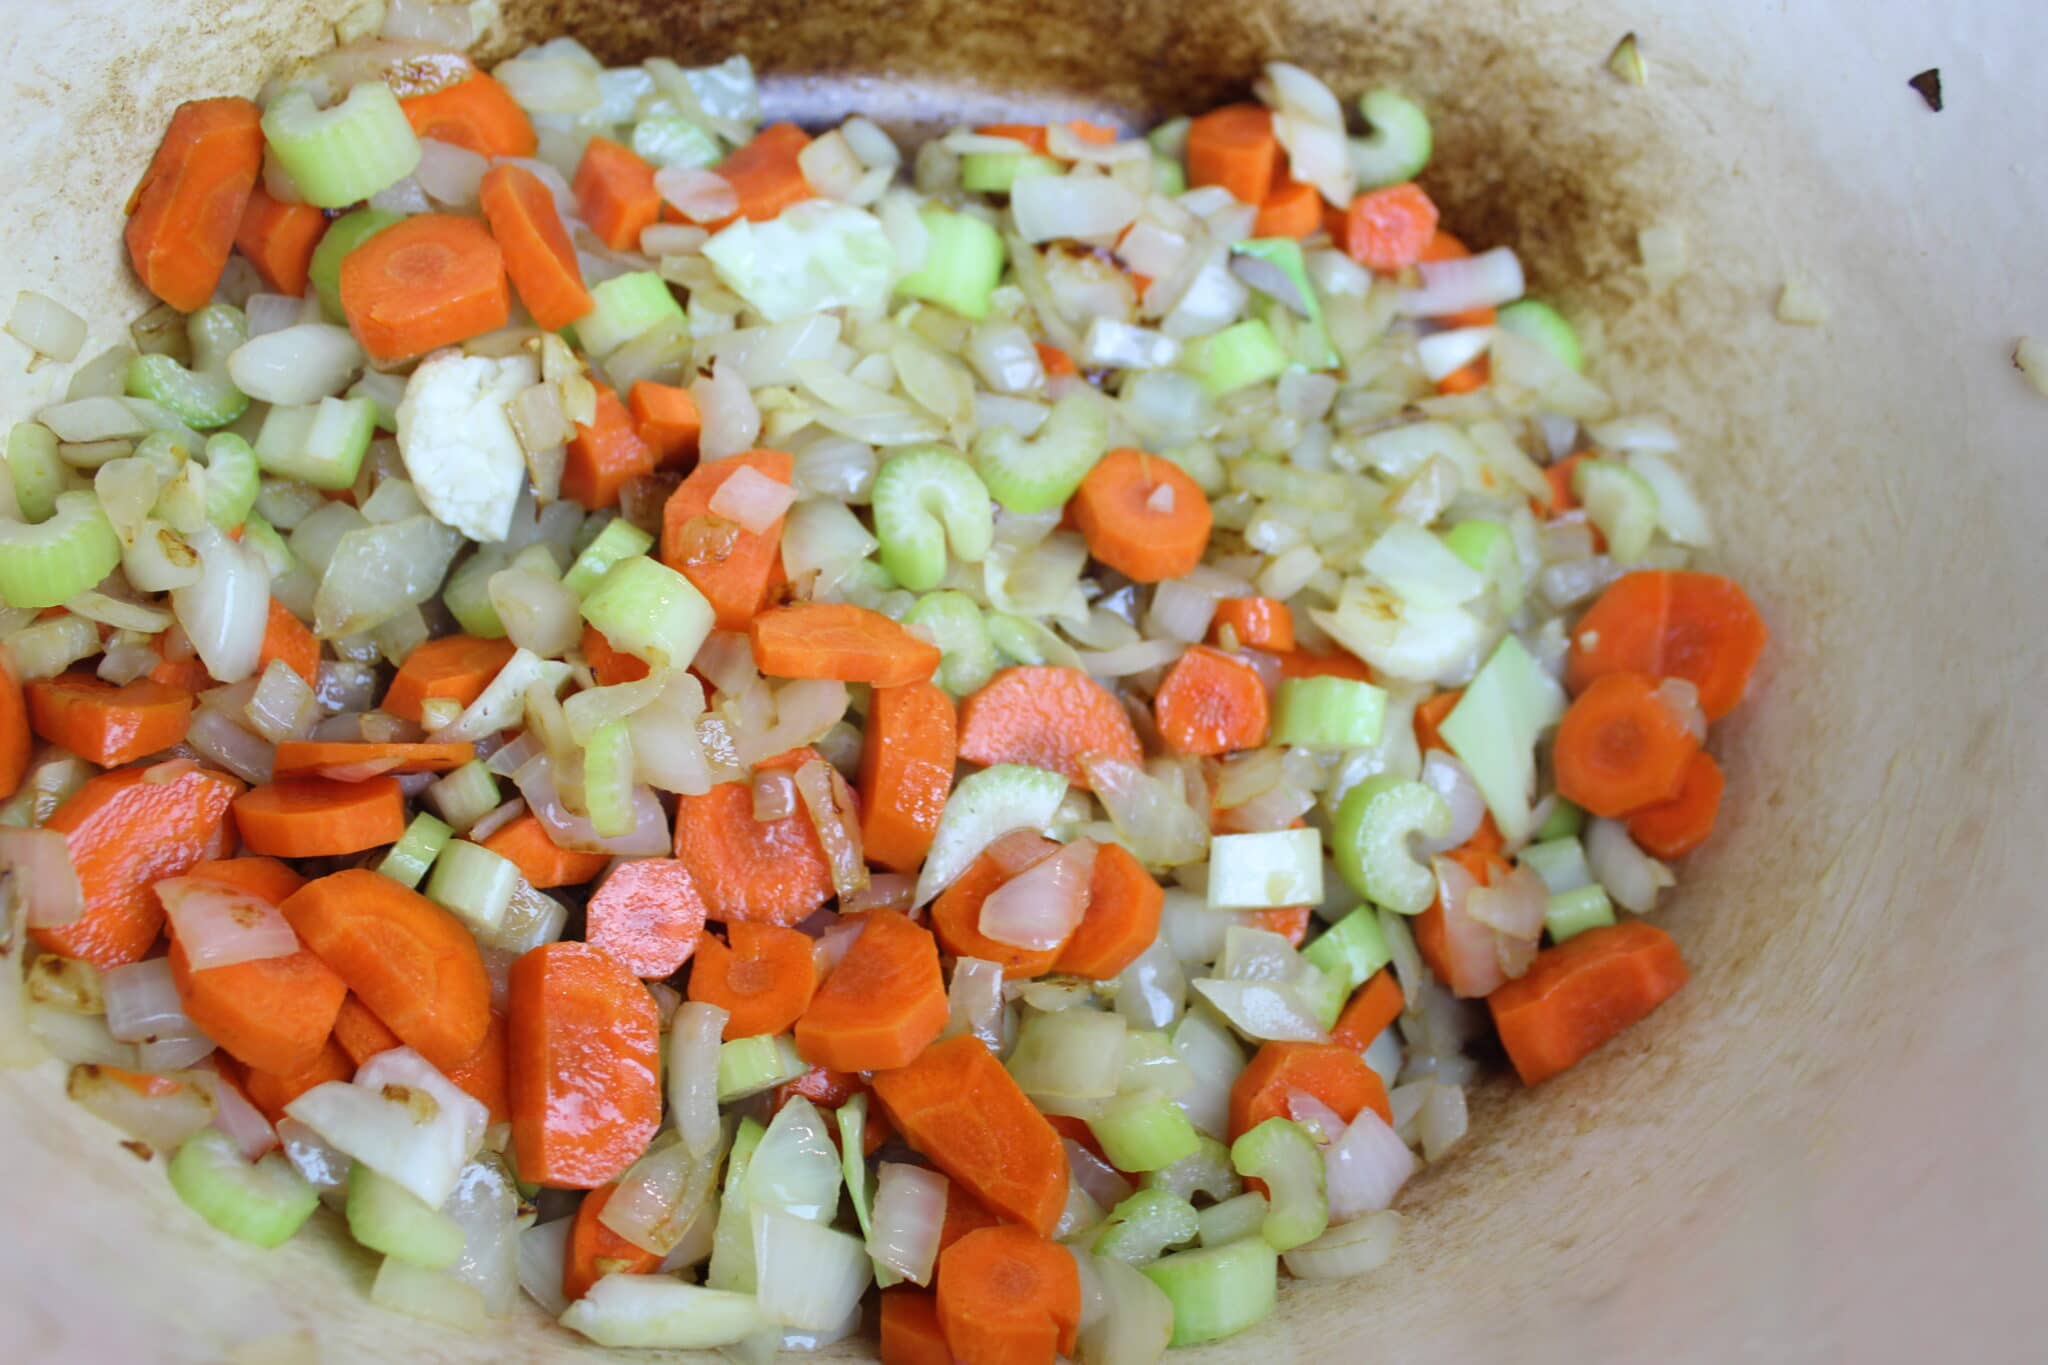 cooking onions, carrots and celery